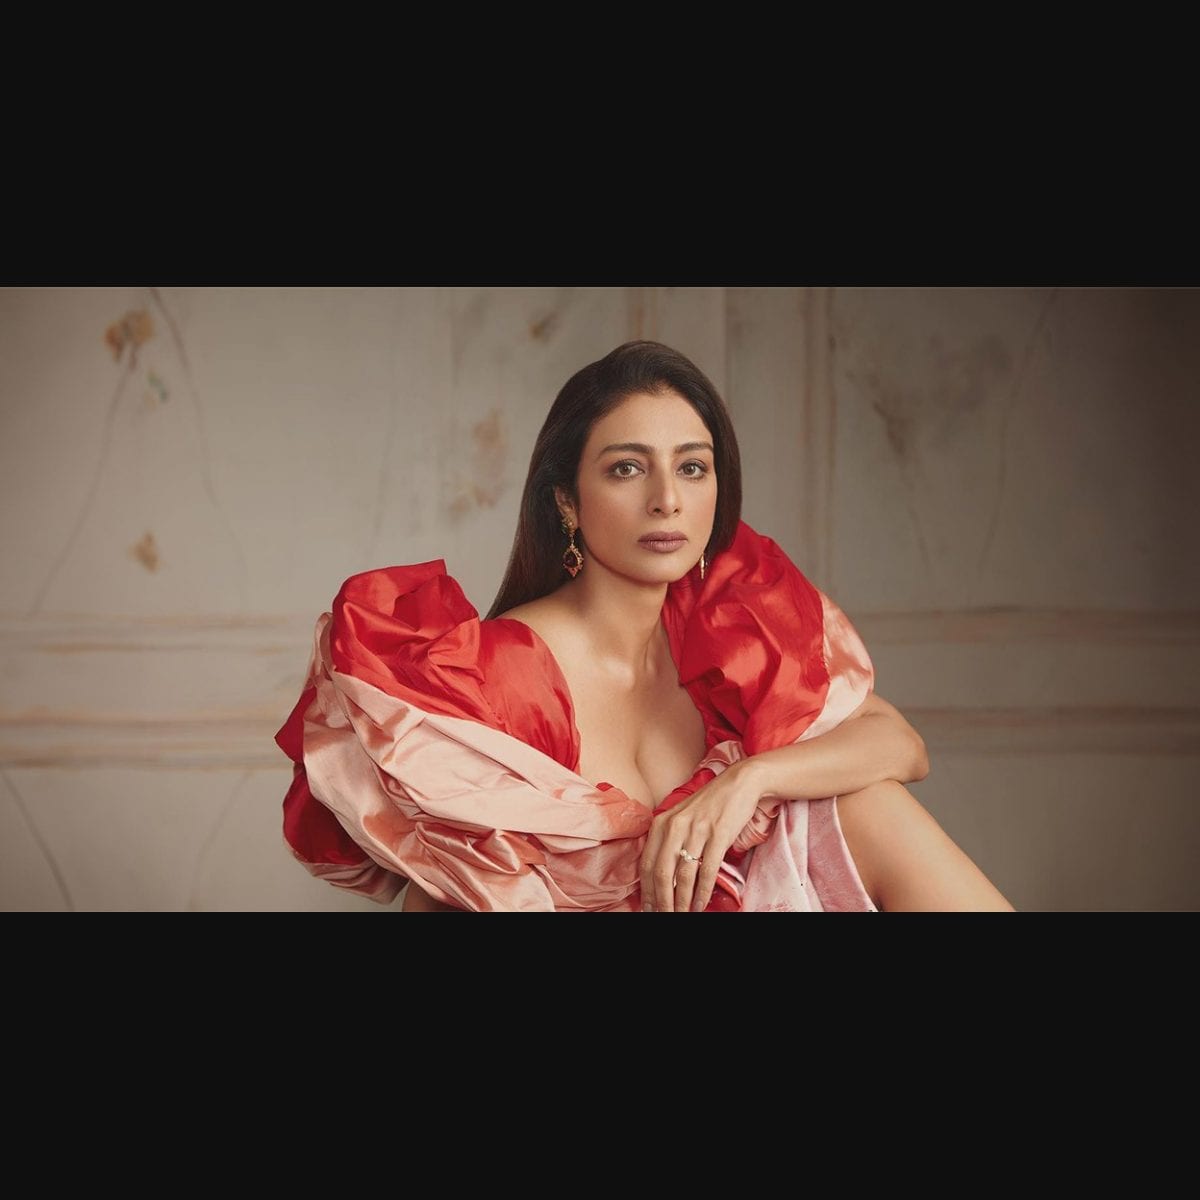 Tabu On Being Single At 52: Happiness Comes From Many Things Unconnected